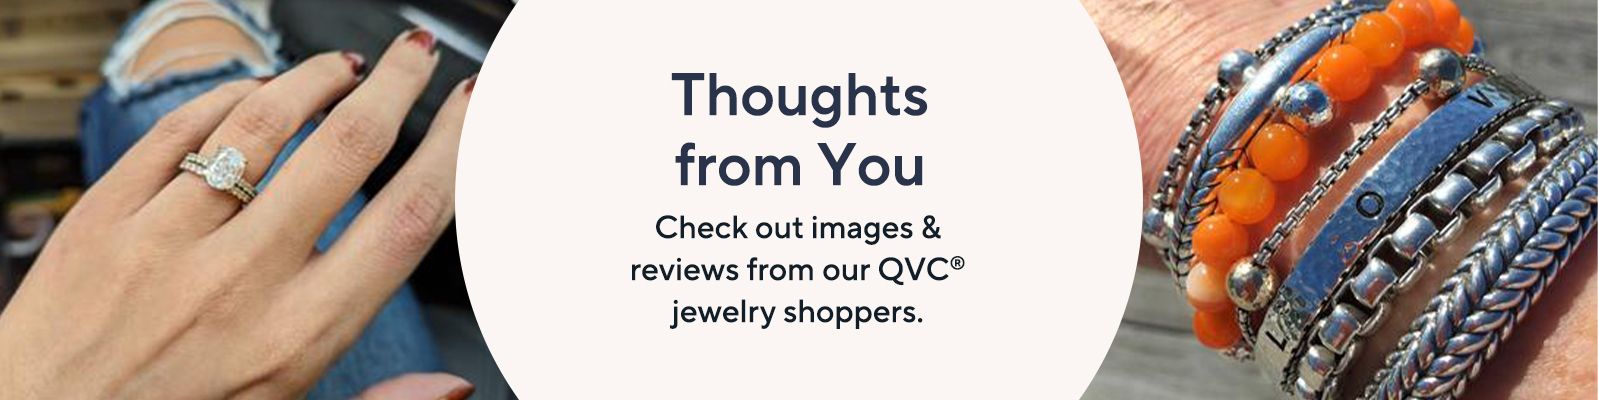 Thoughts from You  Check out images & reviews from our QVC® jewelry shoppers.